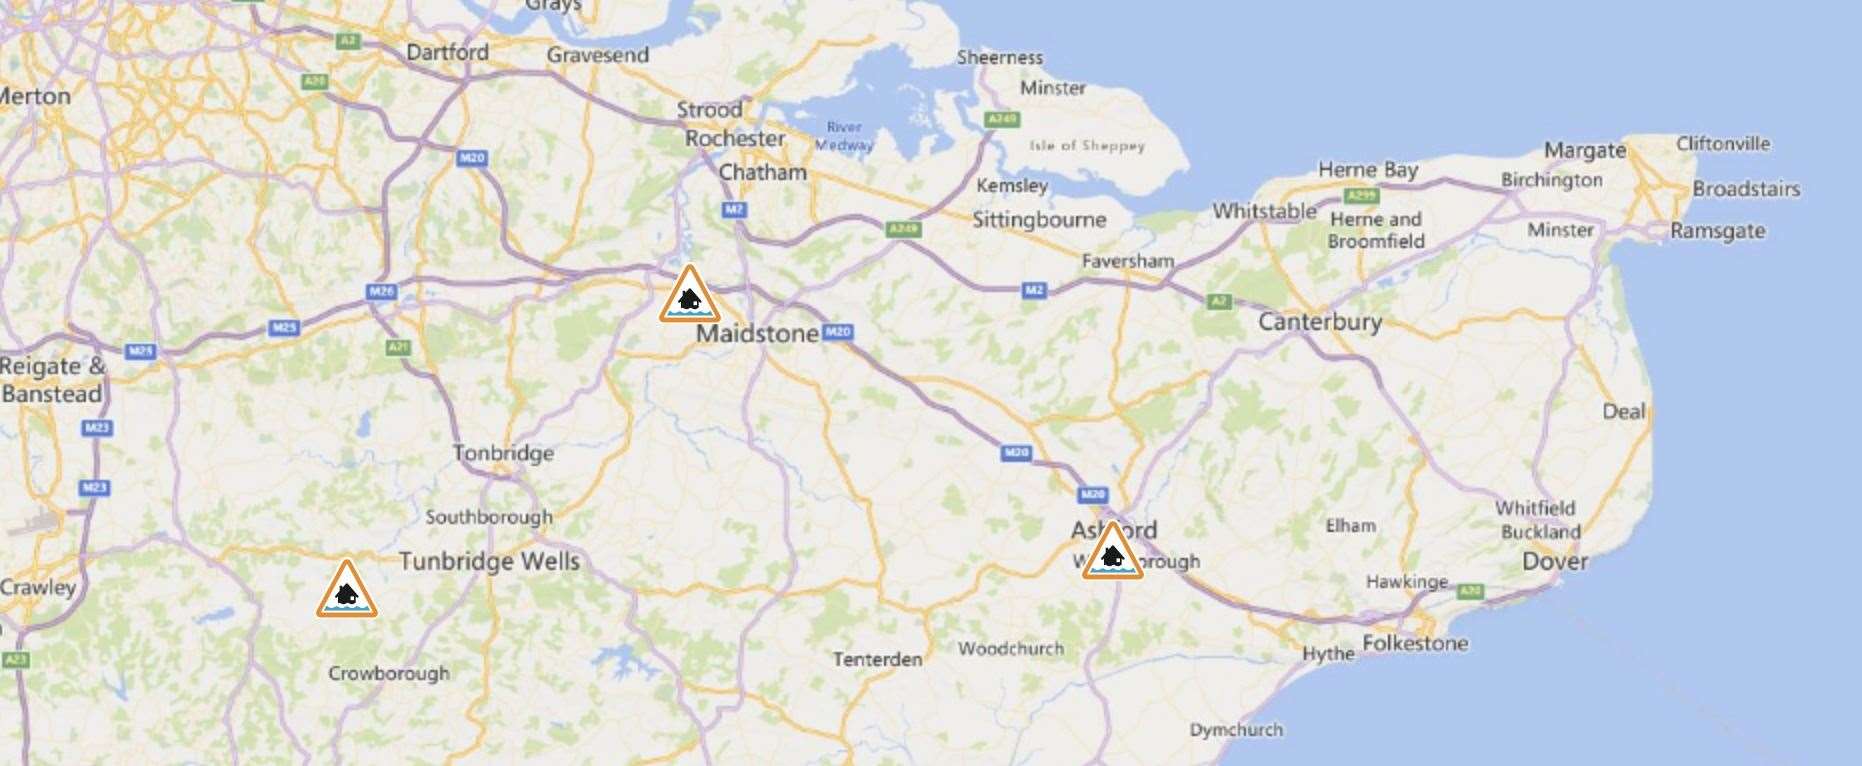 Three flood alerts have also been issued in Kent. Picture: The Environment Agency